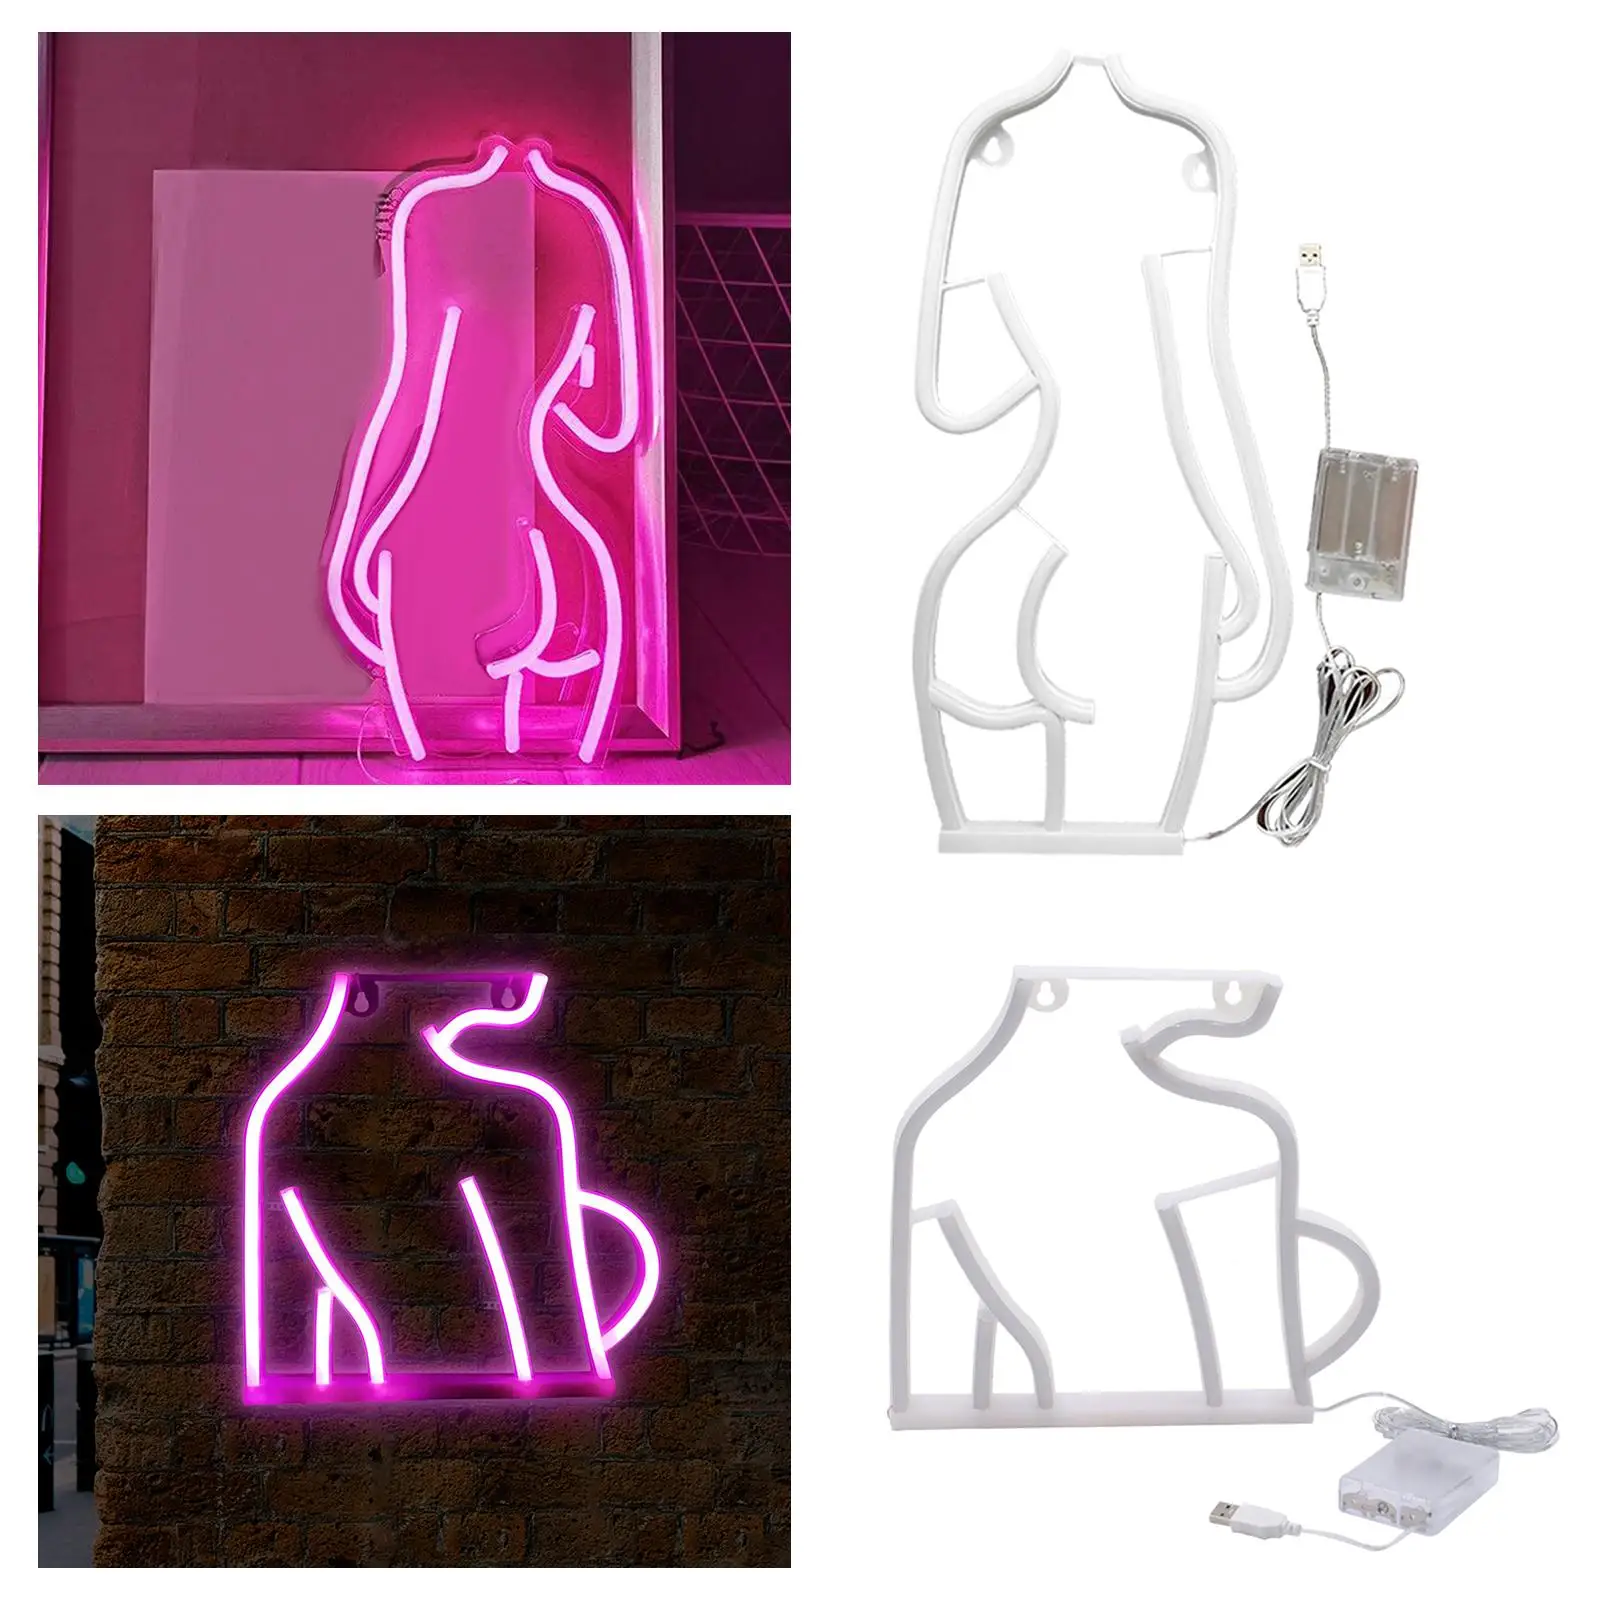 Lady Back Neon Sign Table Lamp Decorative Light for Store Coffee Shop